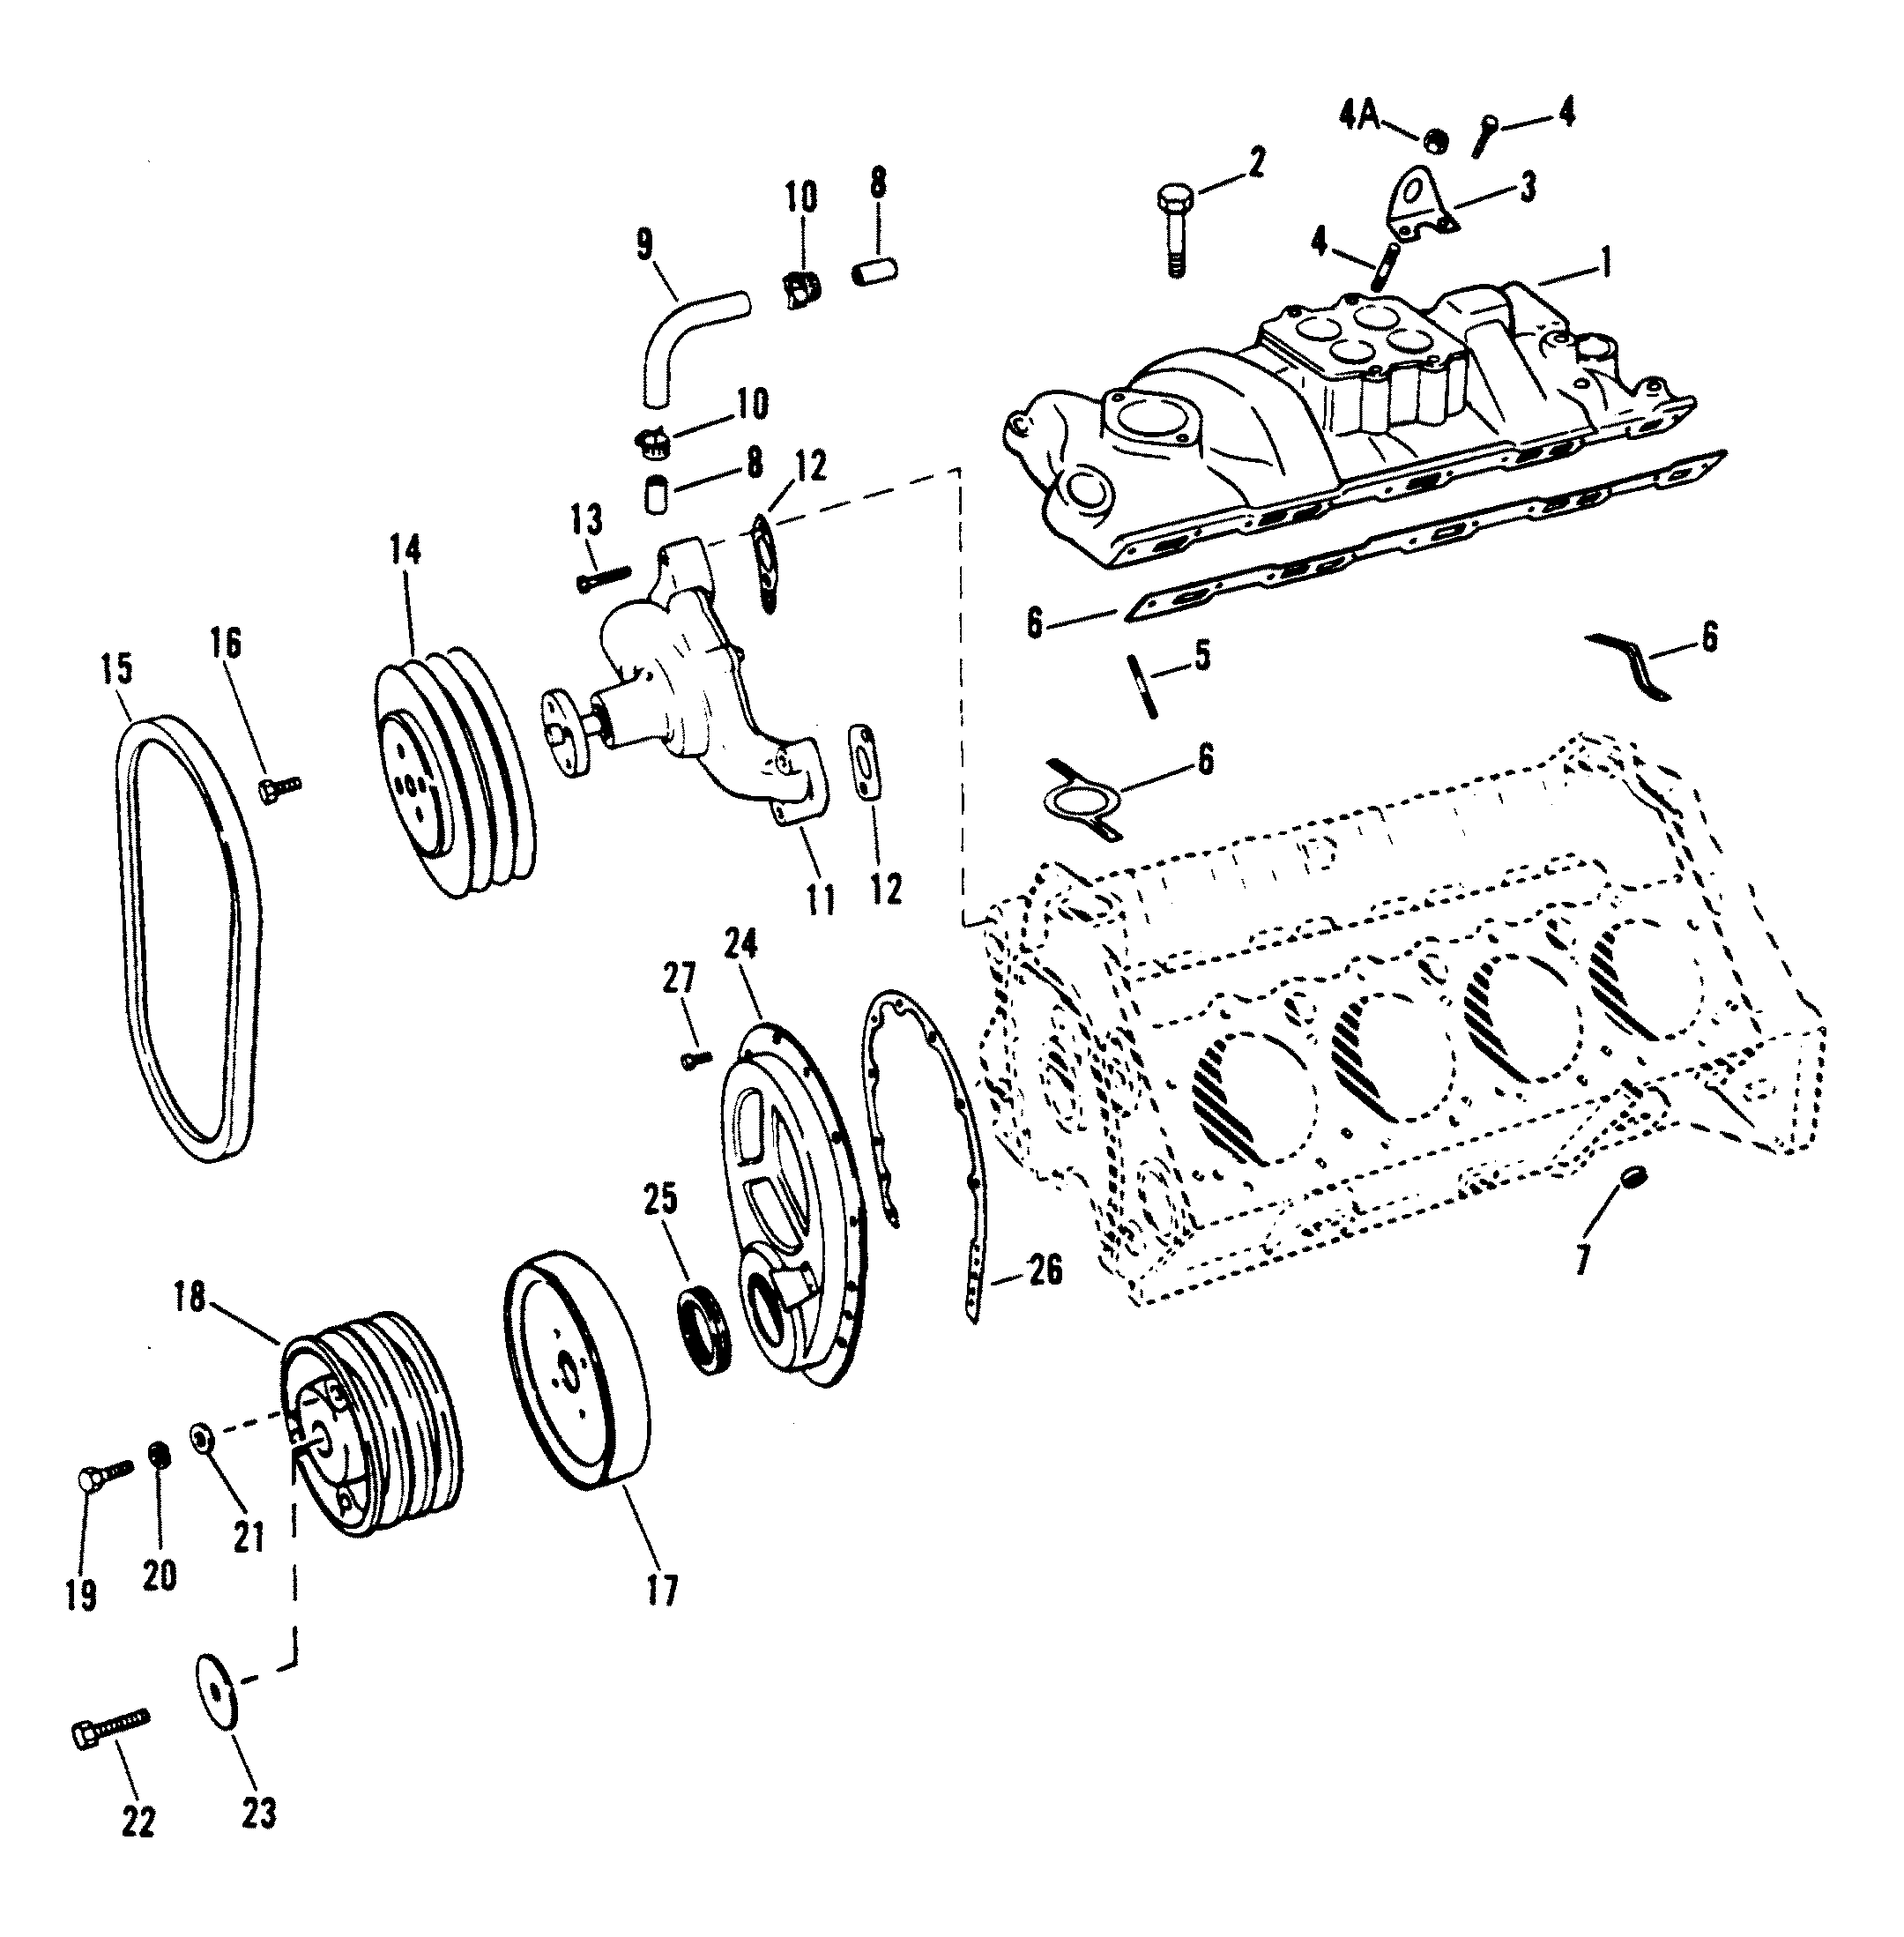 INTAKE MANIFOLD AND FRONT COVER